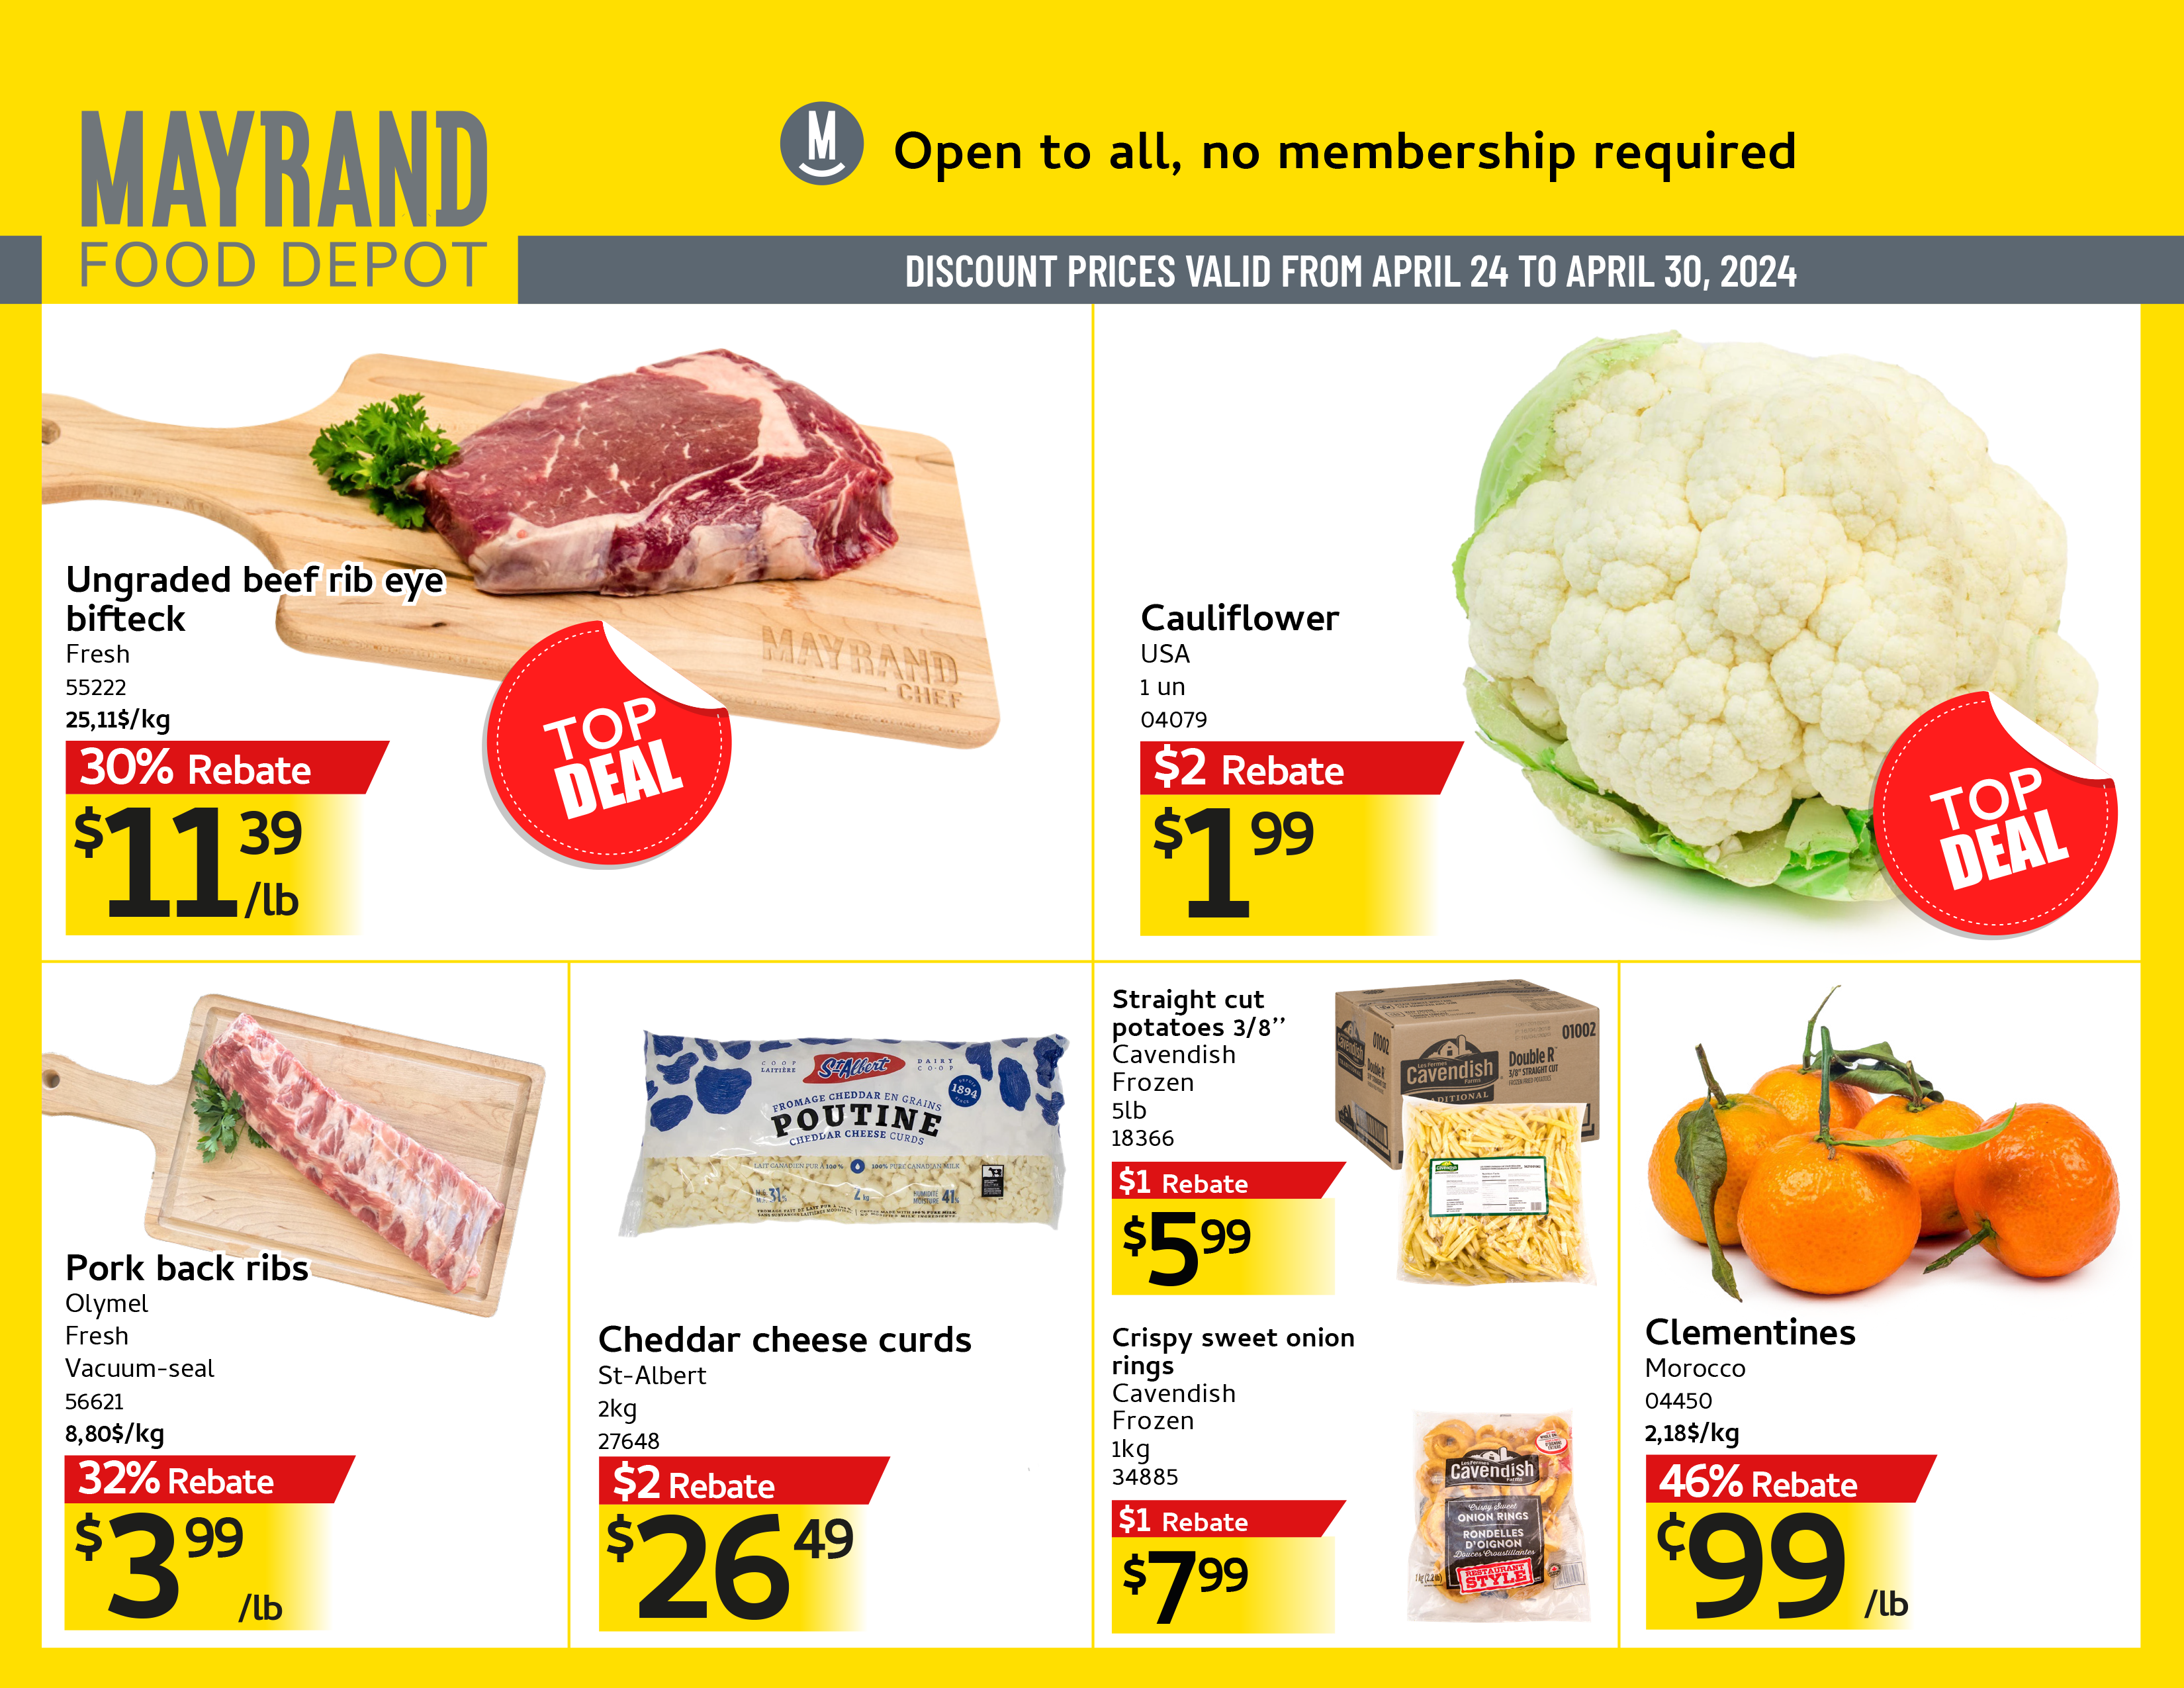 Weekly Special Prices | Mayrand Food Depot